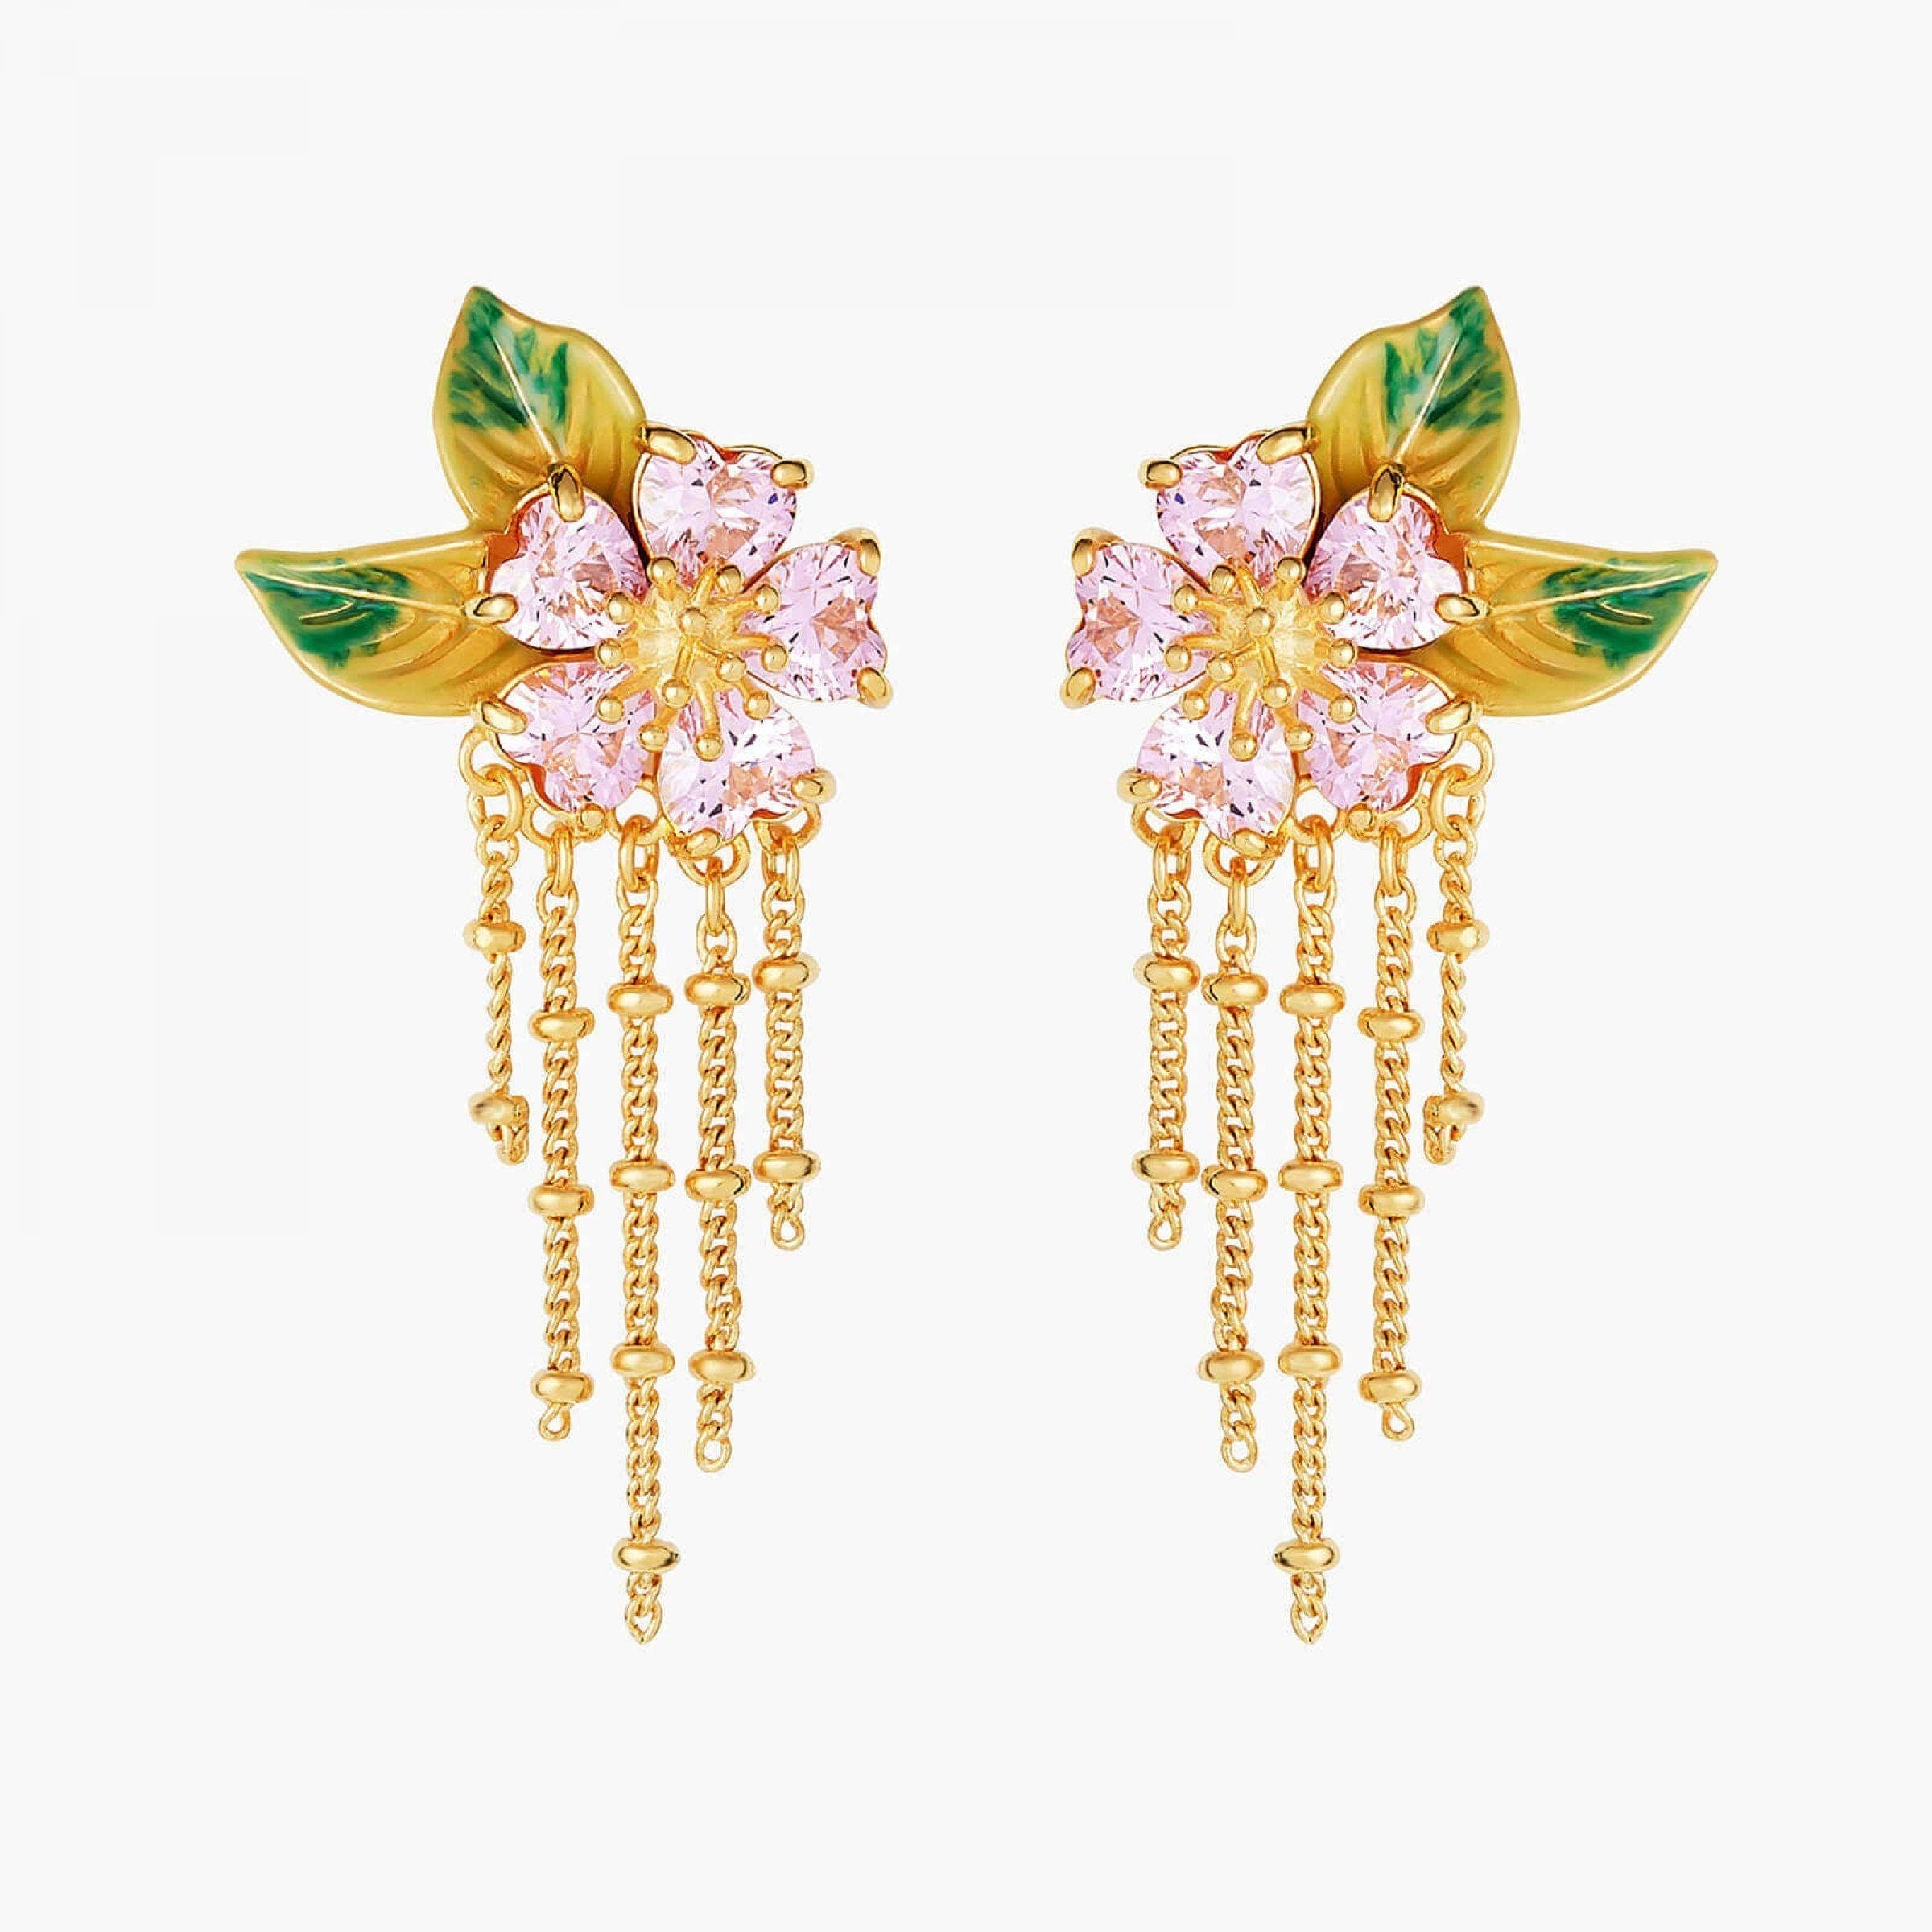 Foliage and Flower Petals Post Earrings